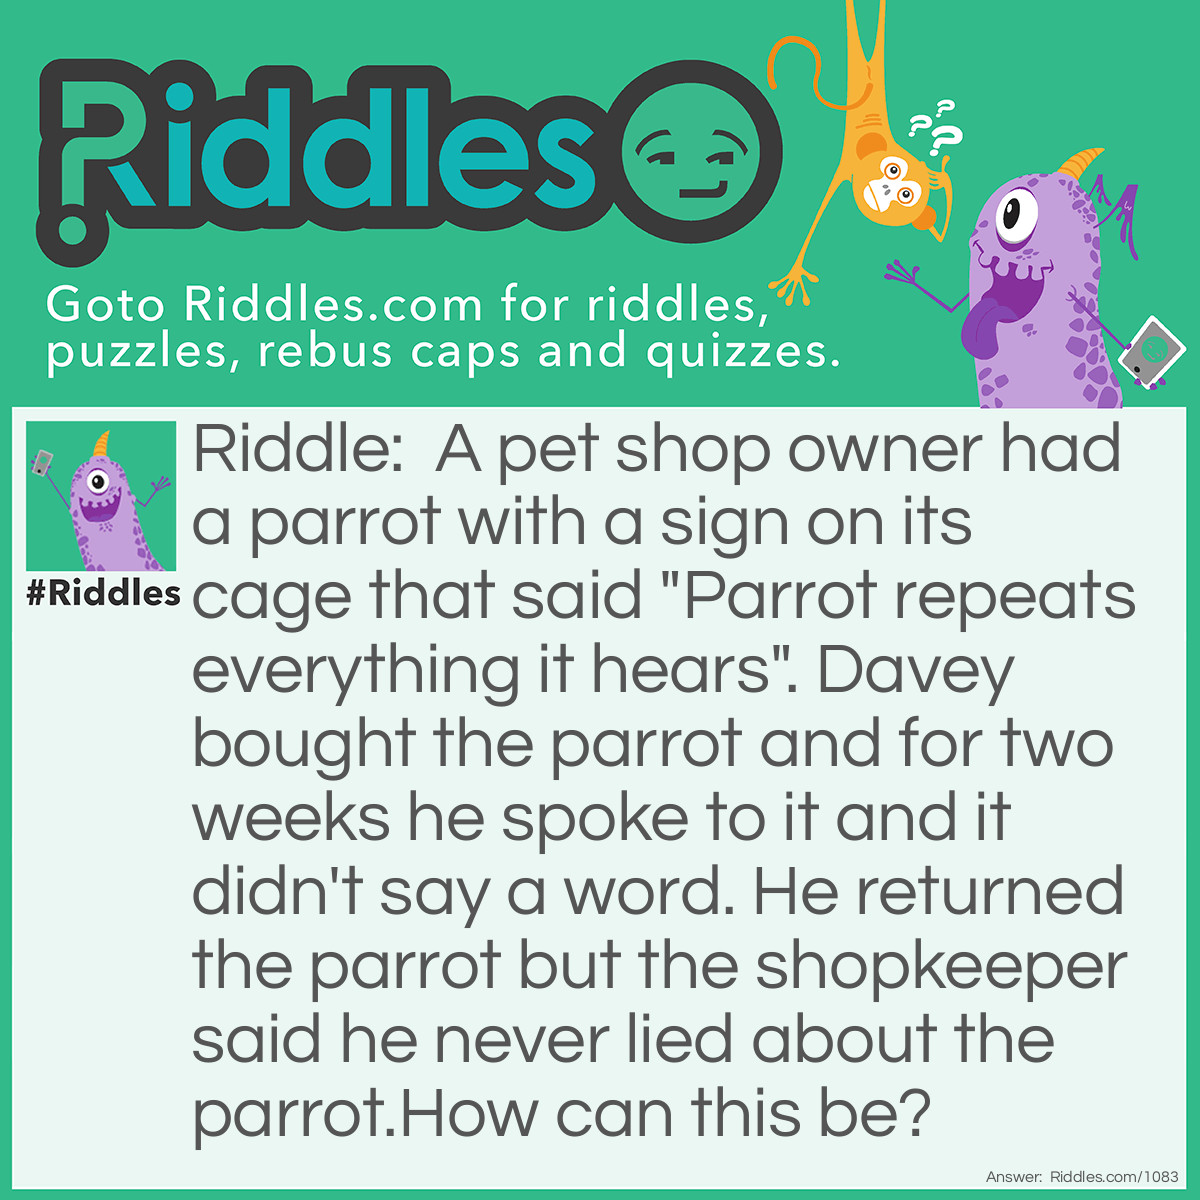 Riddle: A pet shop owner had a parrot with a sign on its cage that said "Parrot repeats everything it hears". Davey bought the parrot and for two weeks he spoke to it and it didn't say a word. He returned the parrot but the shopkeeper said he never lied about the parrot.
How can this be? Answer: The parrot was deaf.